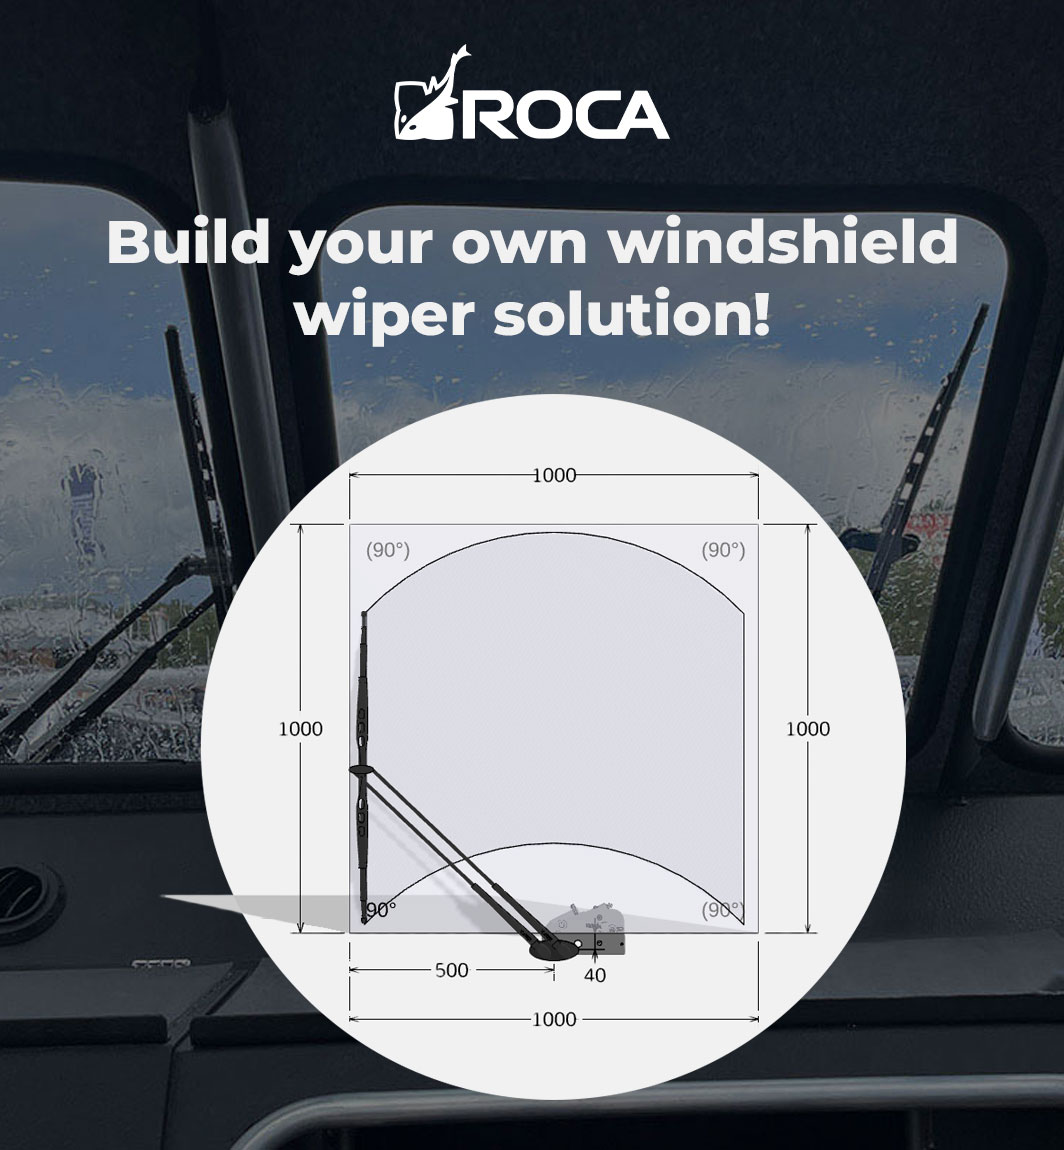 Build your own windshield wiper solution!